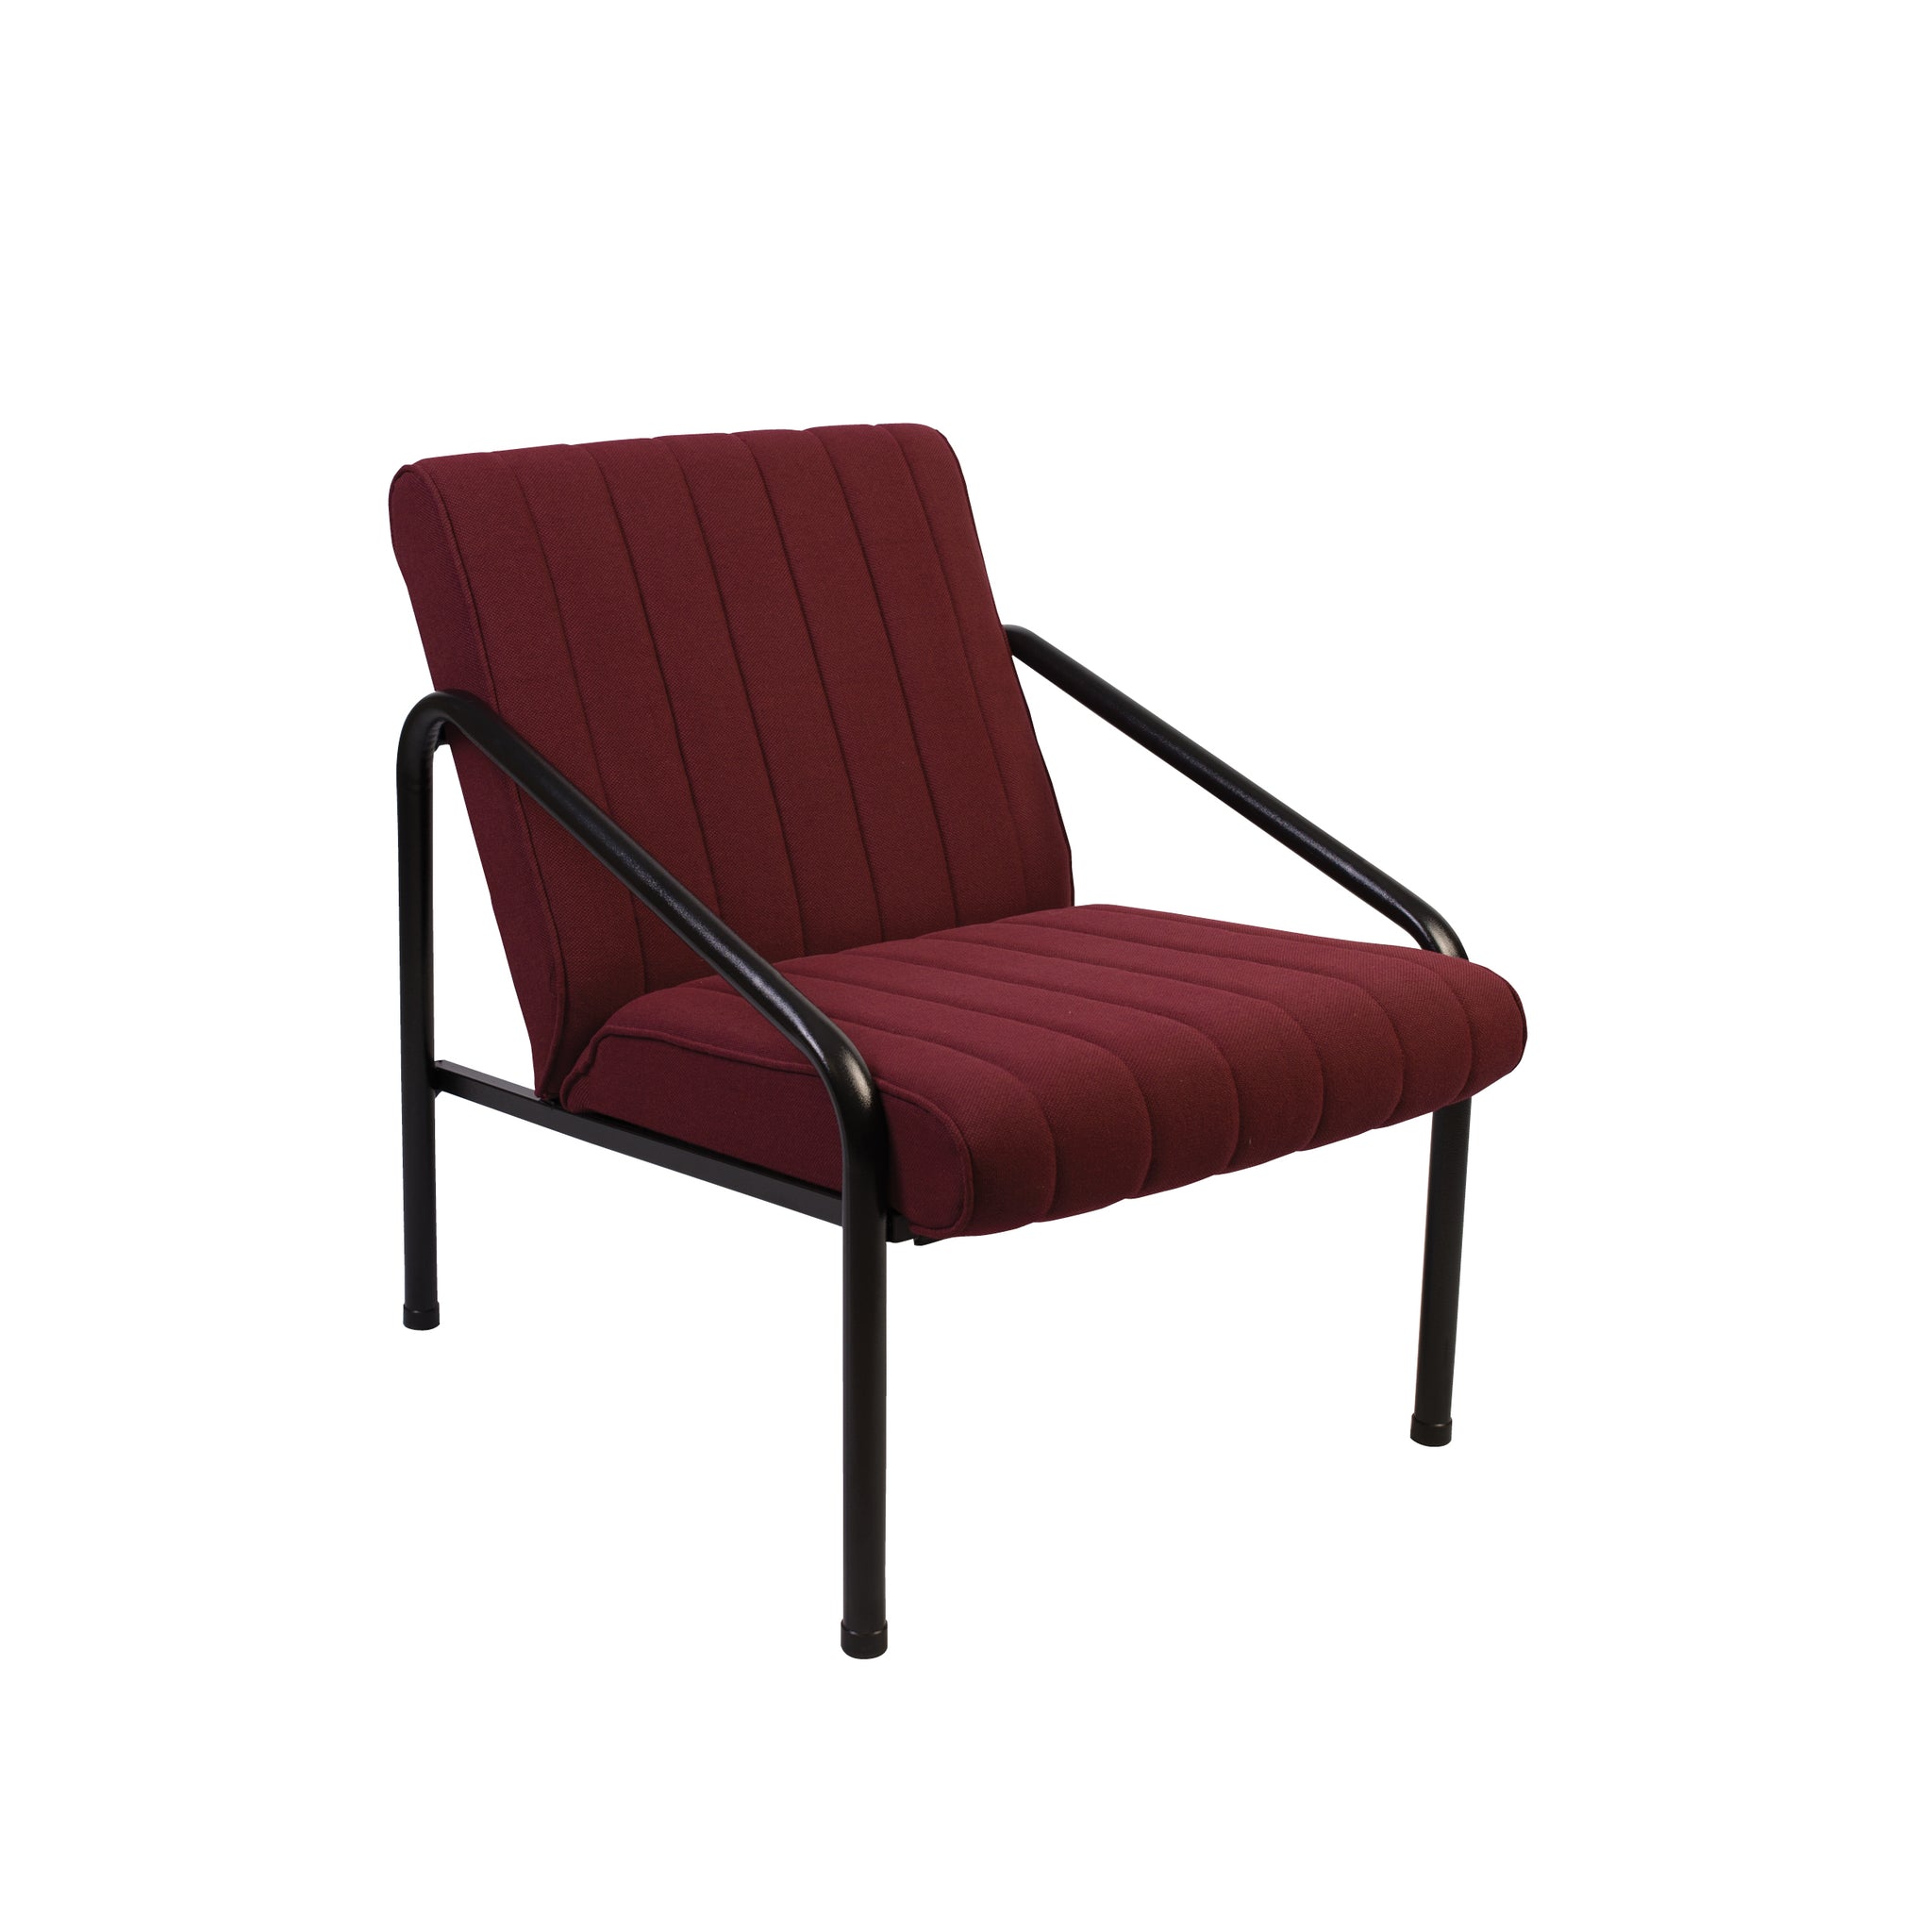 Hedcor Relaxer Single chair